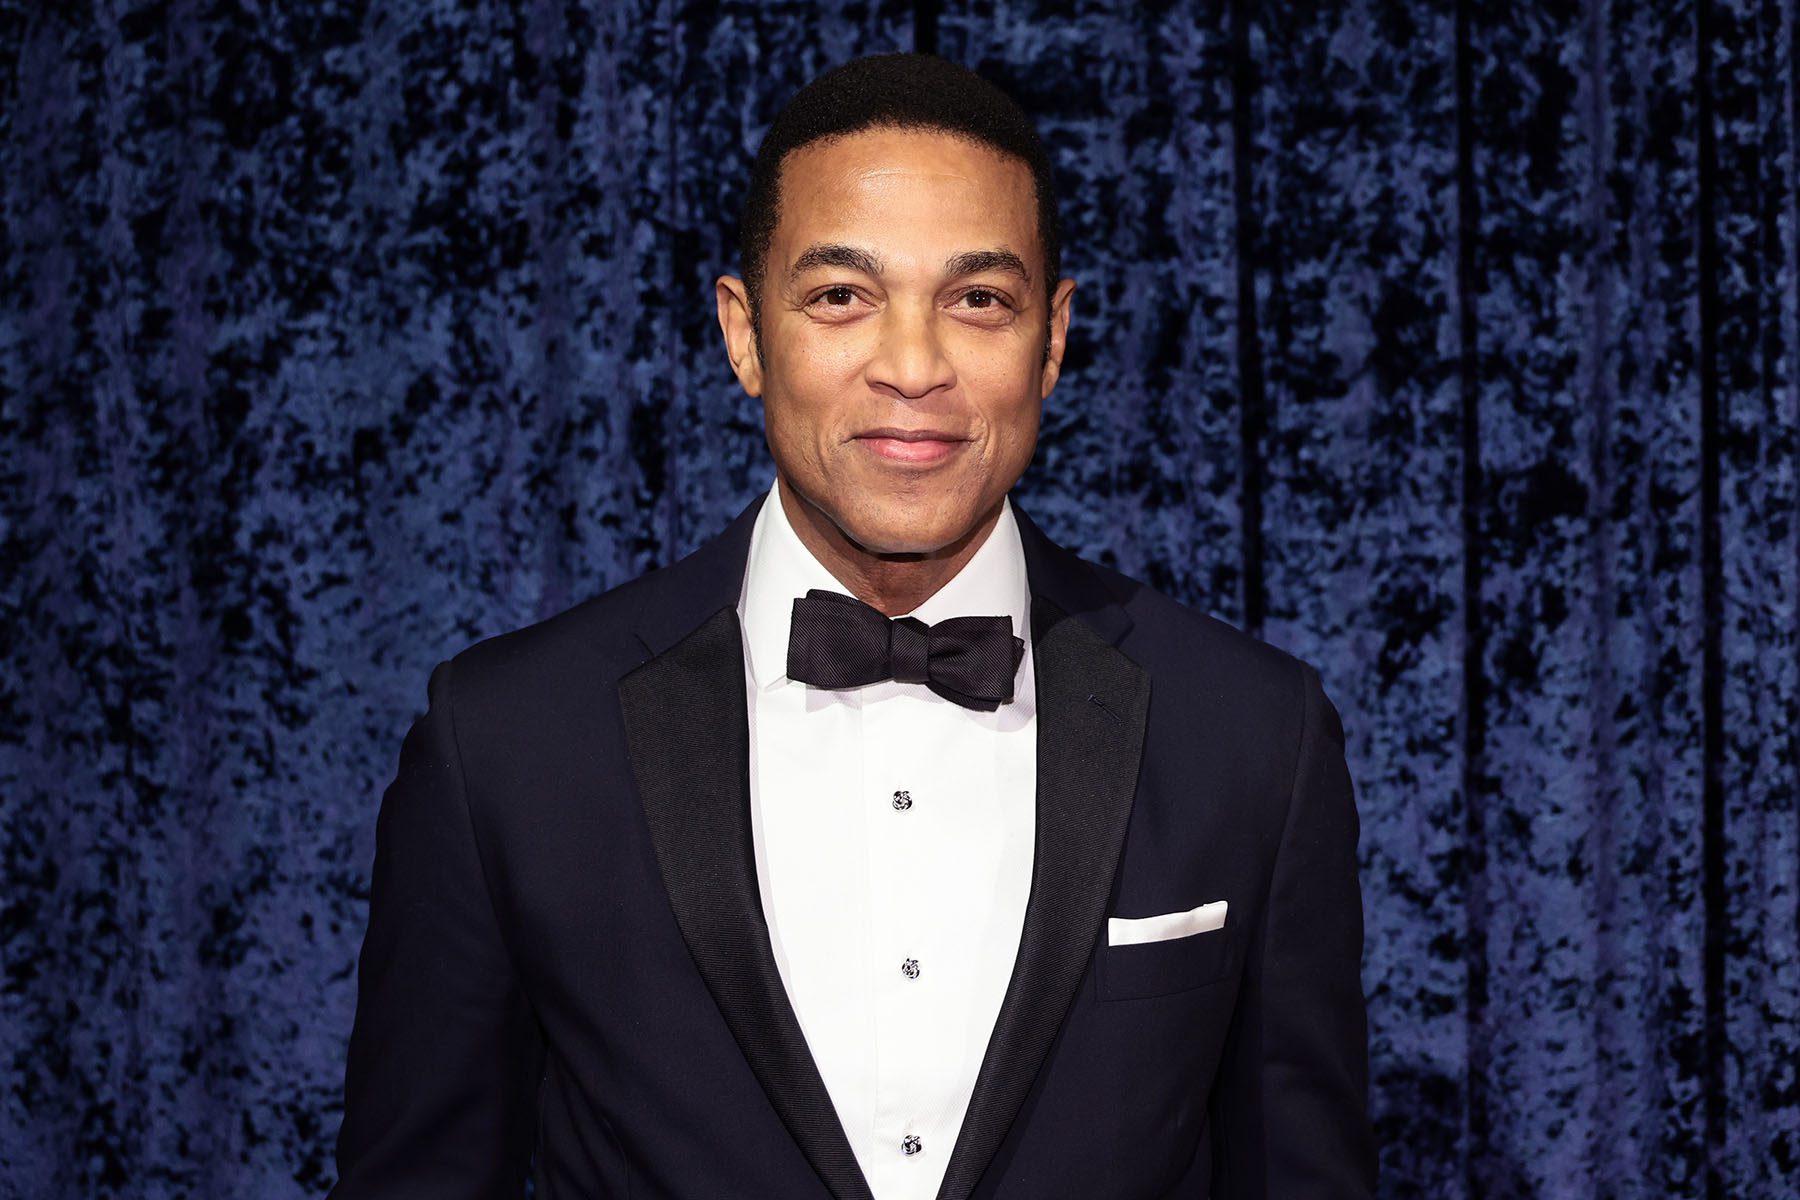 Don Lemon attends an event in New York City in April 2022.